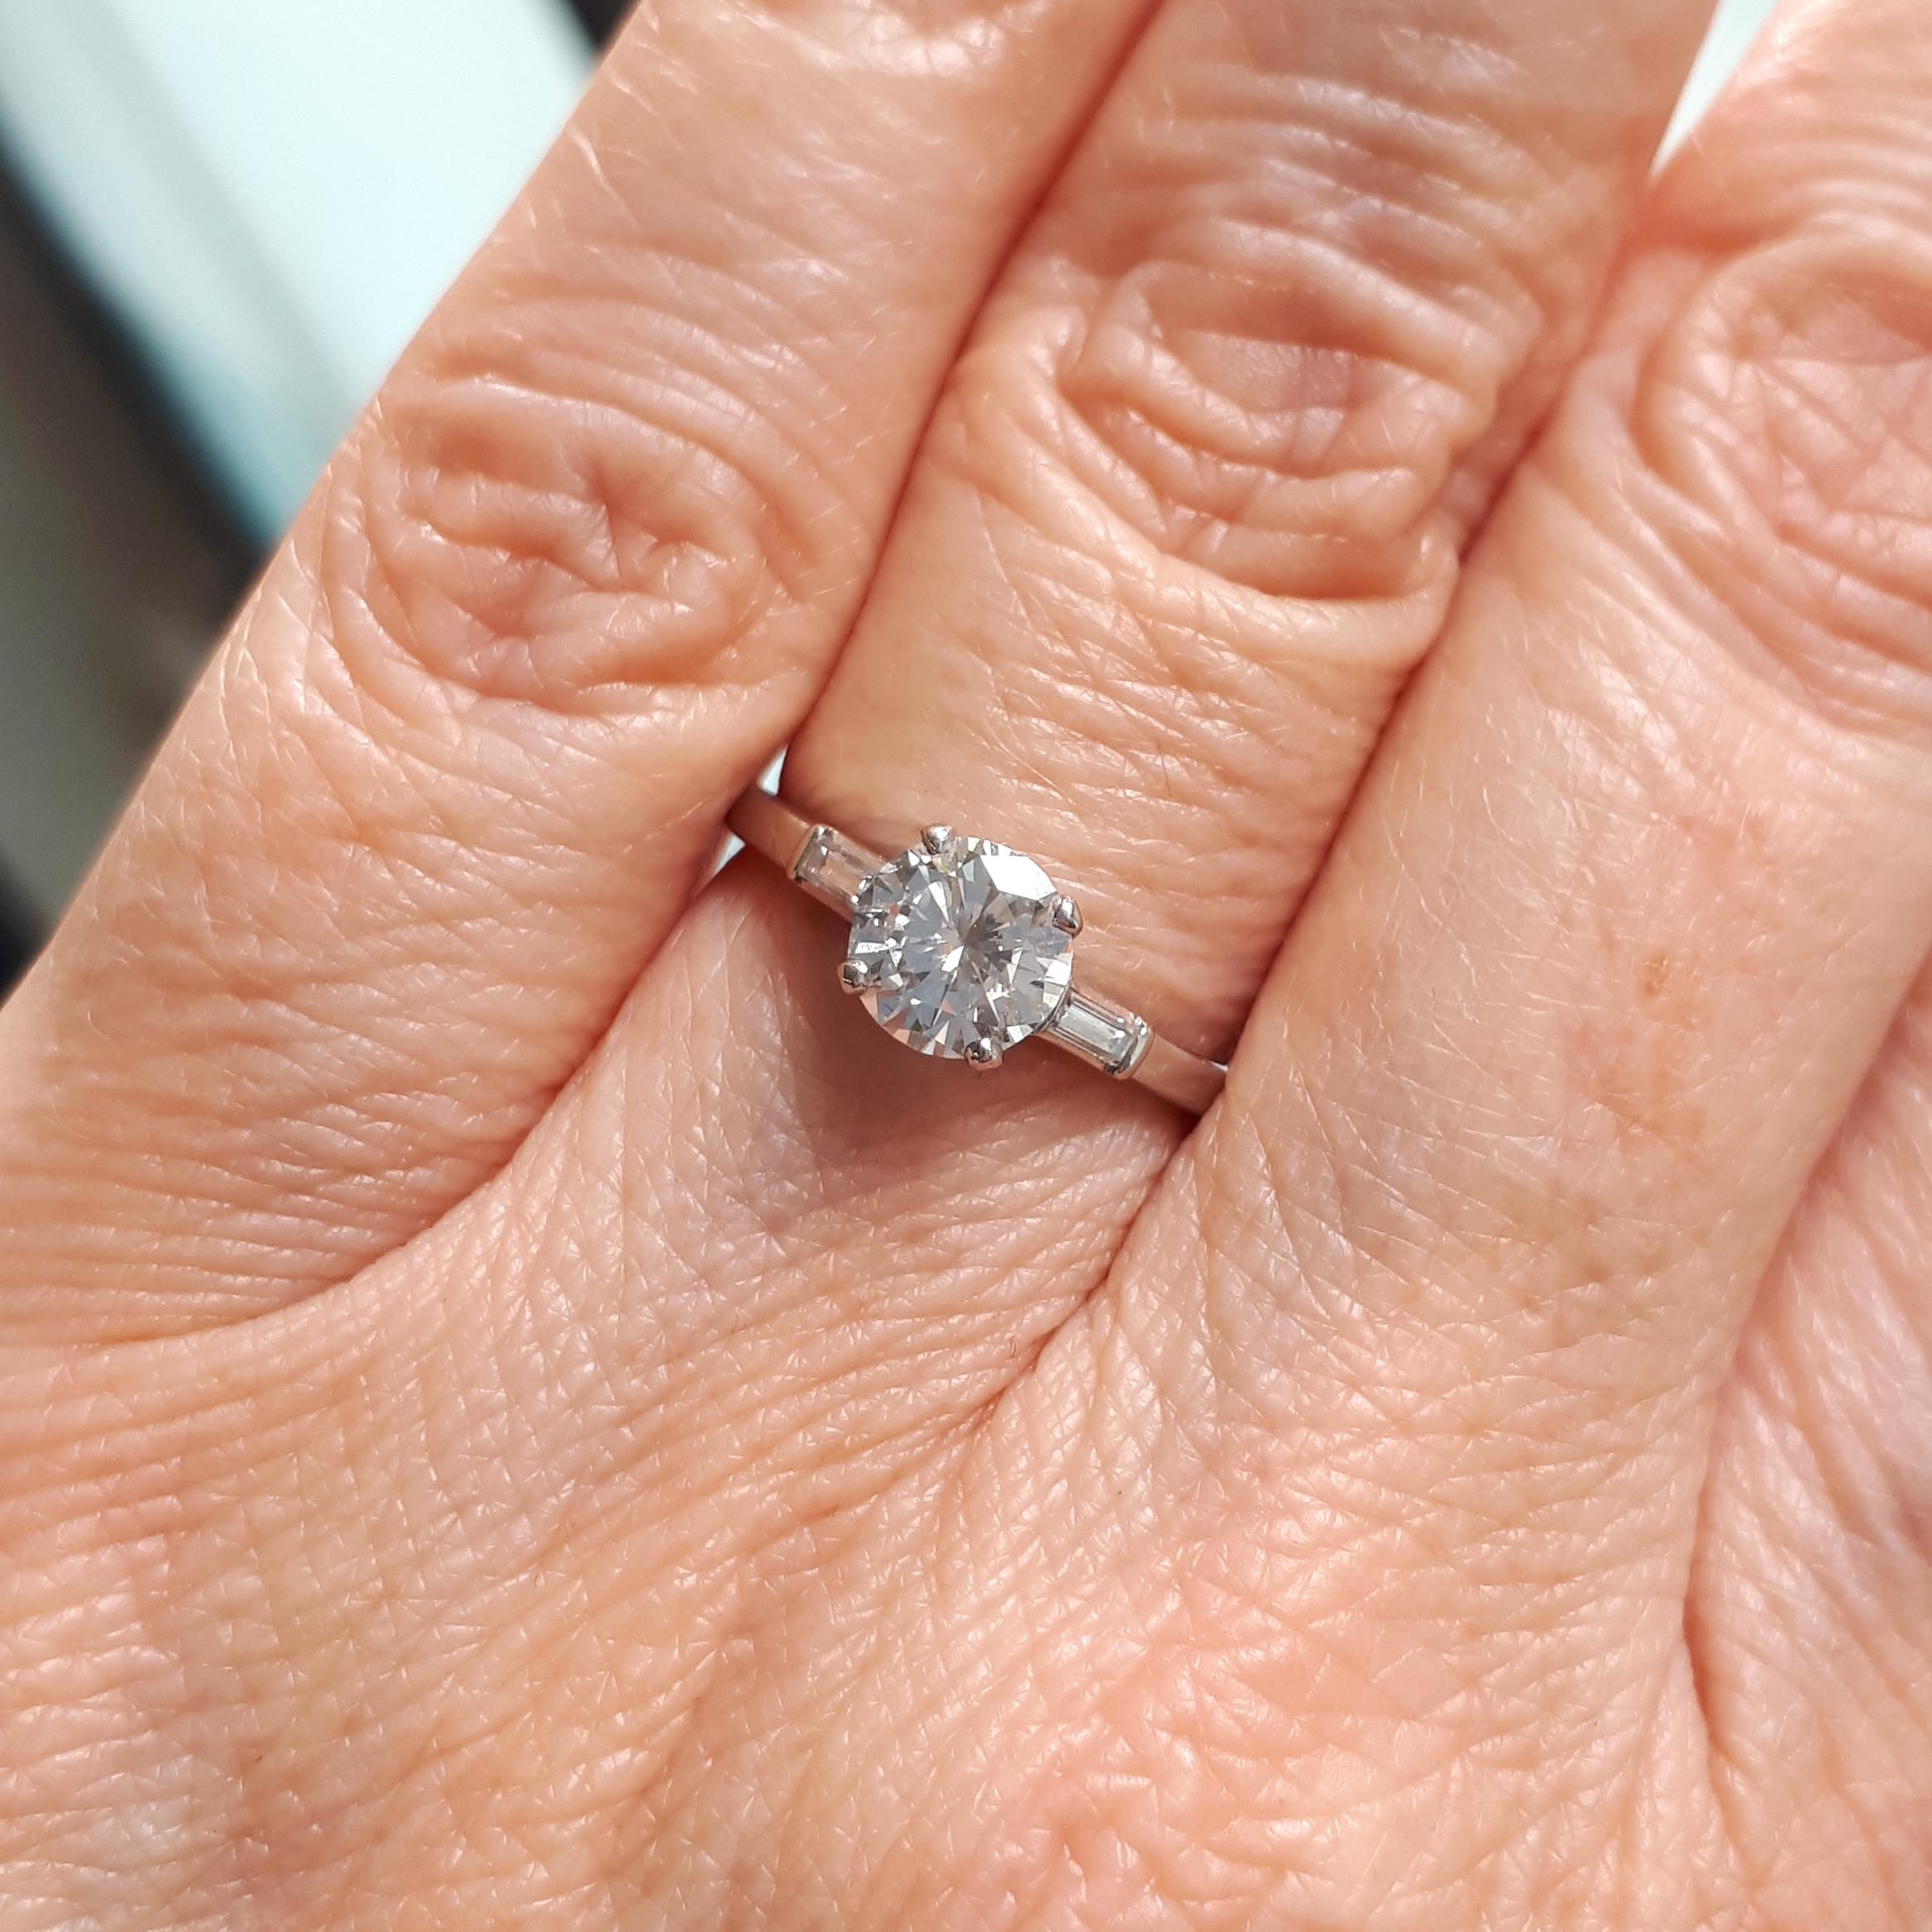 A vintage single stone diamond ring, set with a 0.81 carat, E-F colour, VS1 clarity, round brilliant-cut diamond, in a four claw setting, with baguette-cut diamond set shoulders, mounted in platinum, with a maker's mark for J. & L. Hartzberg,